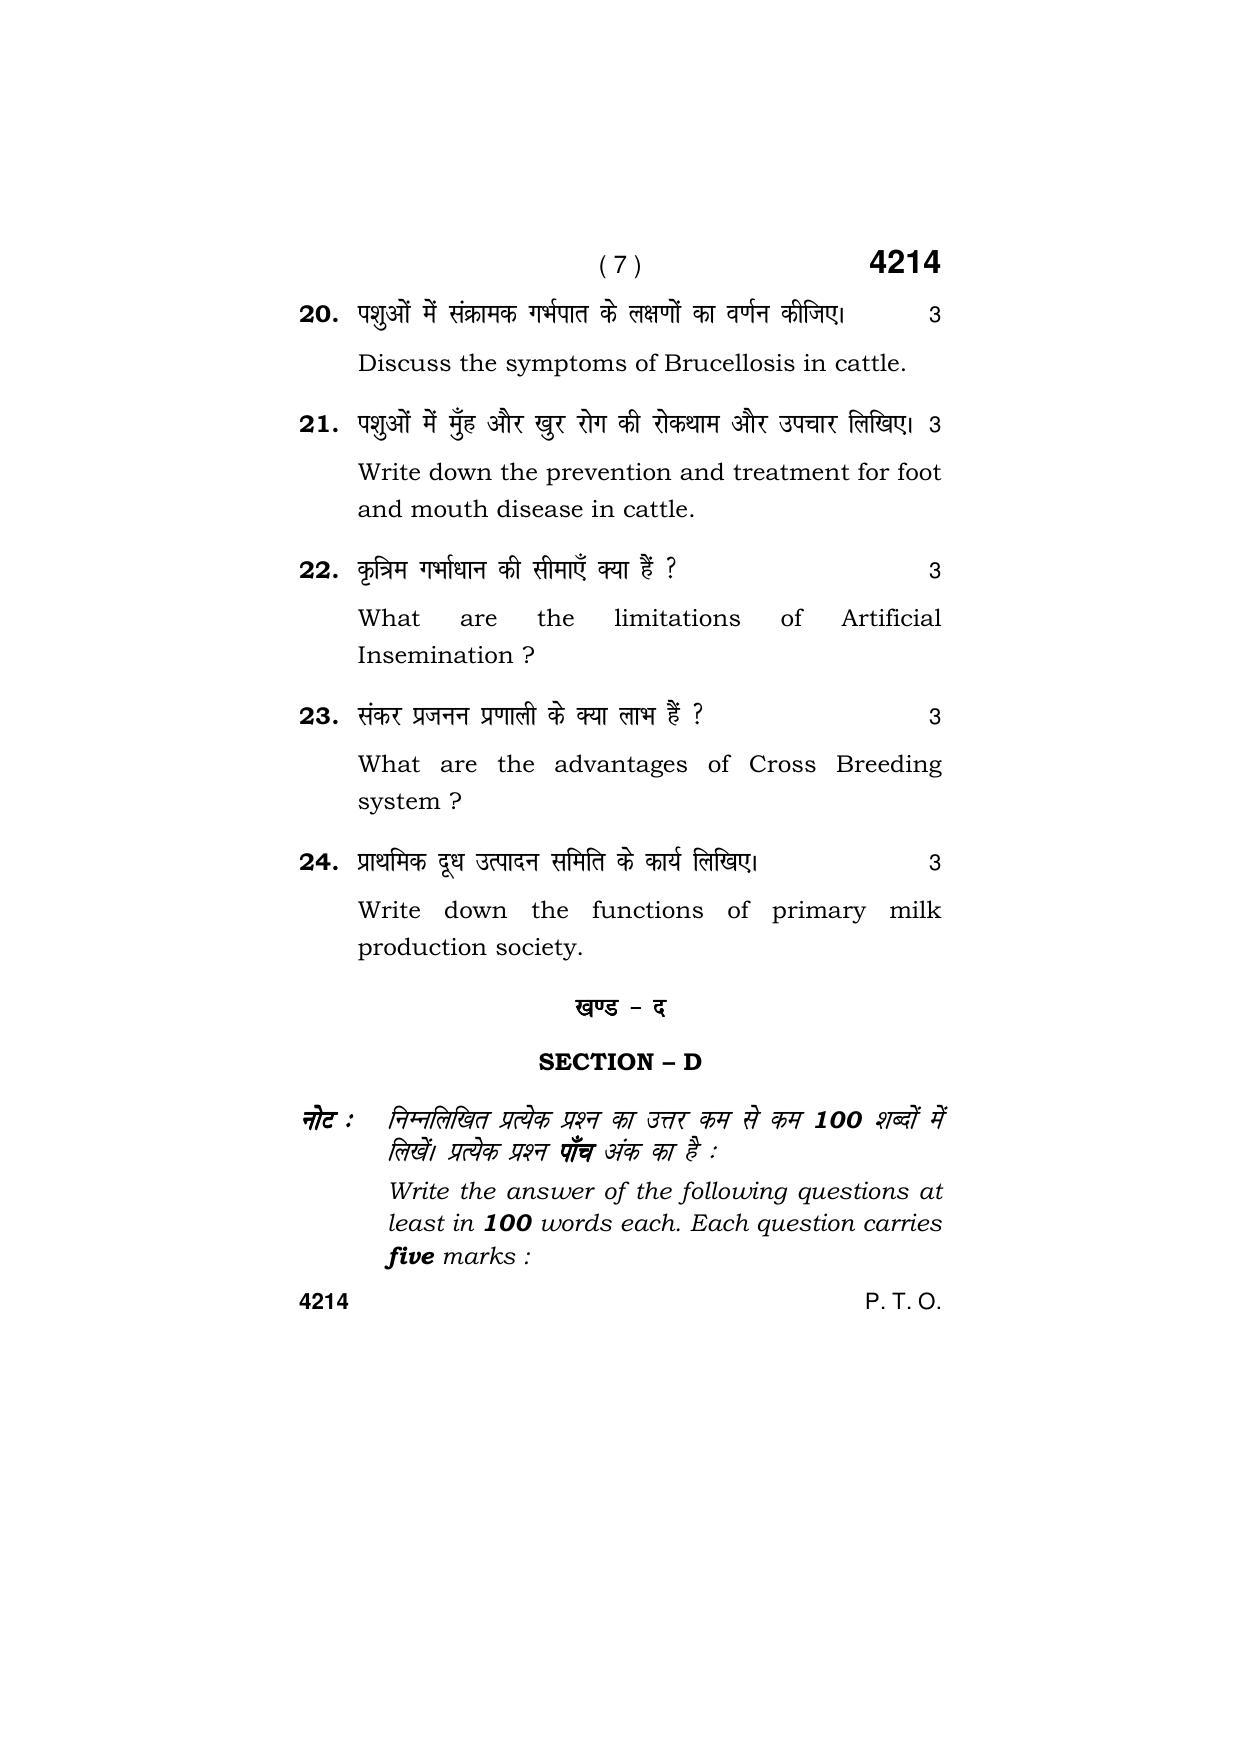 Haryana Board HBSE Class 10 Animal Husbandry 2019 Question Paper - Page 7